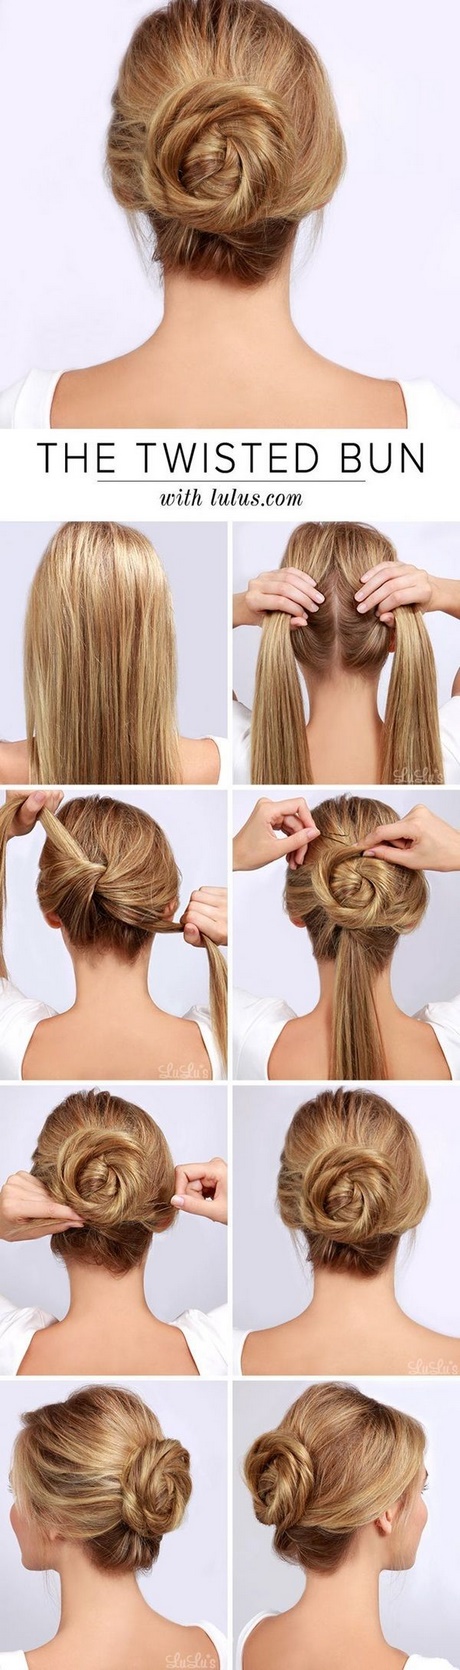 everyday-easy-hairstyles-for-long-hair-30_2 Everyday easy hairstyles for long hair